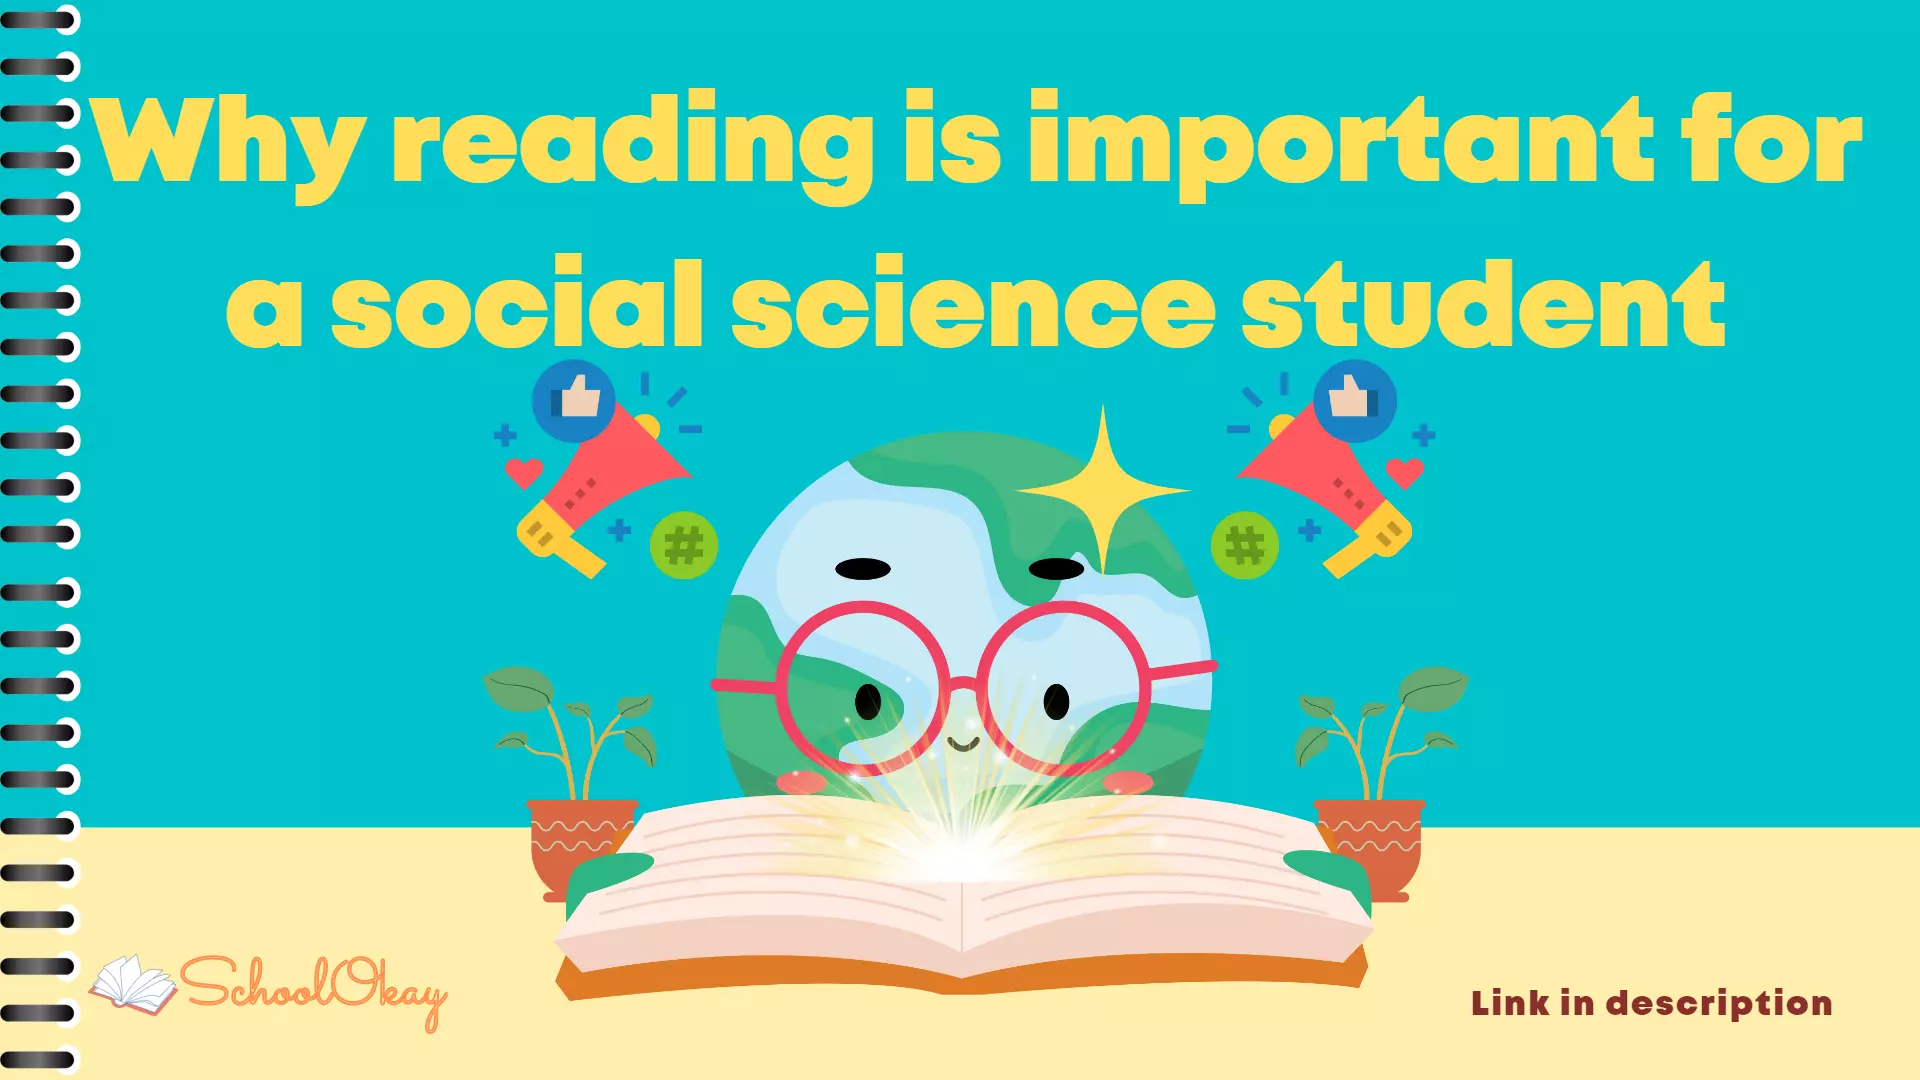 Why reading is important for a social science student